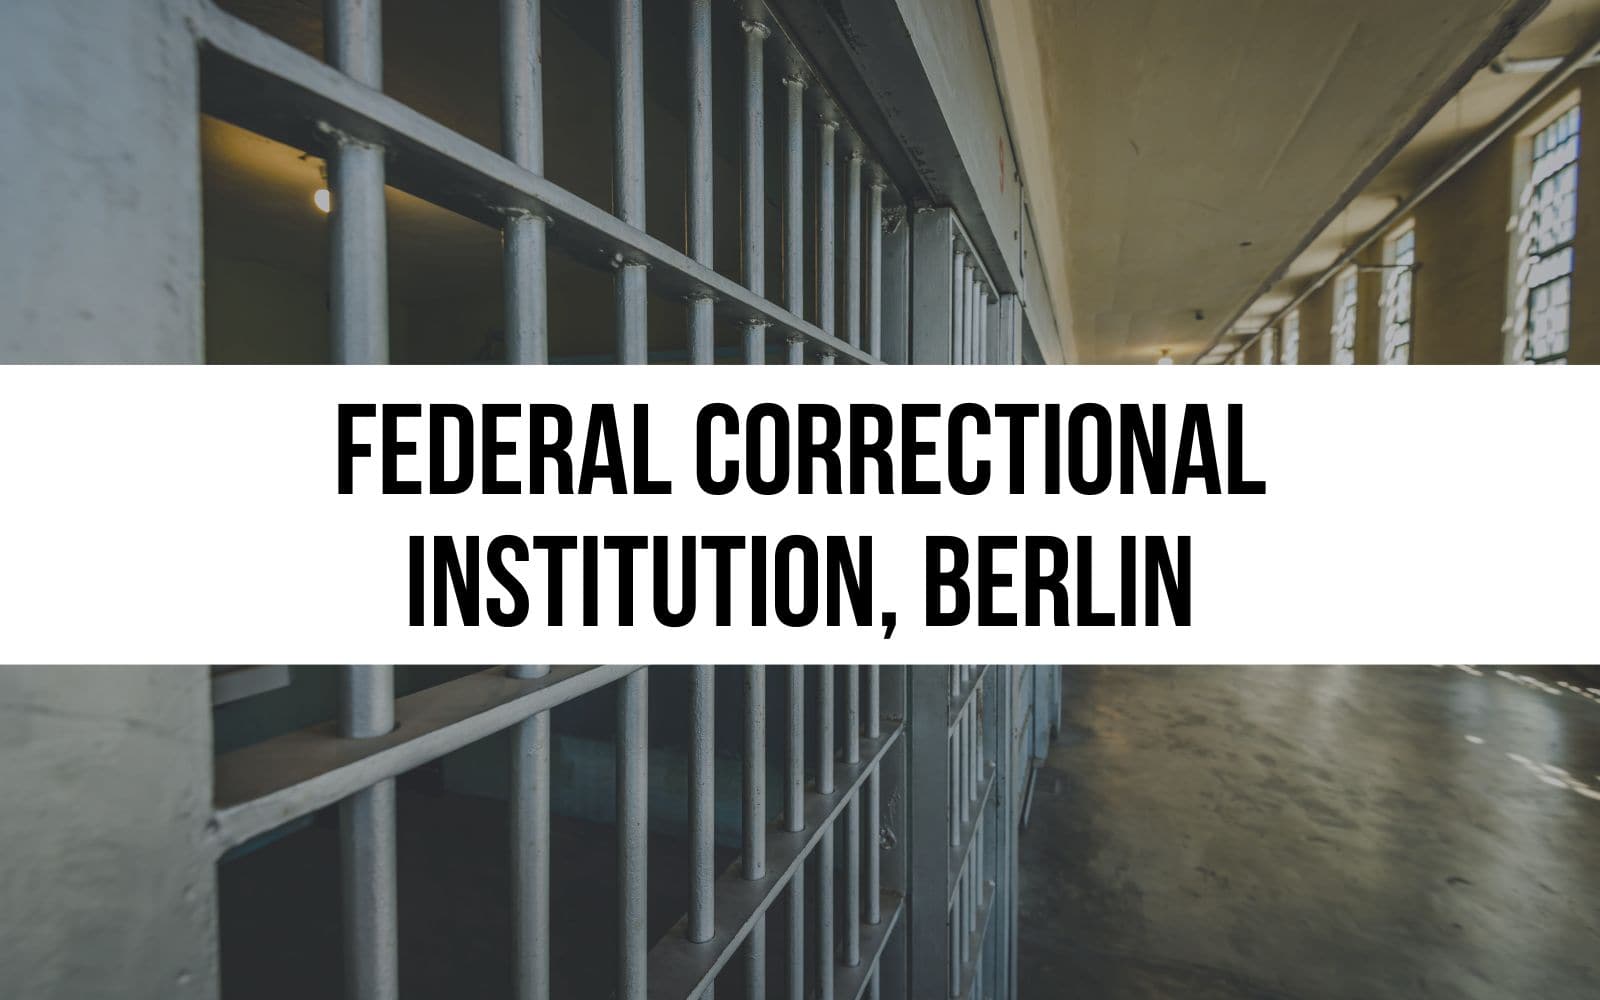 Federal Correctional Institution, Berlin